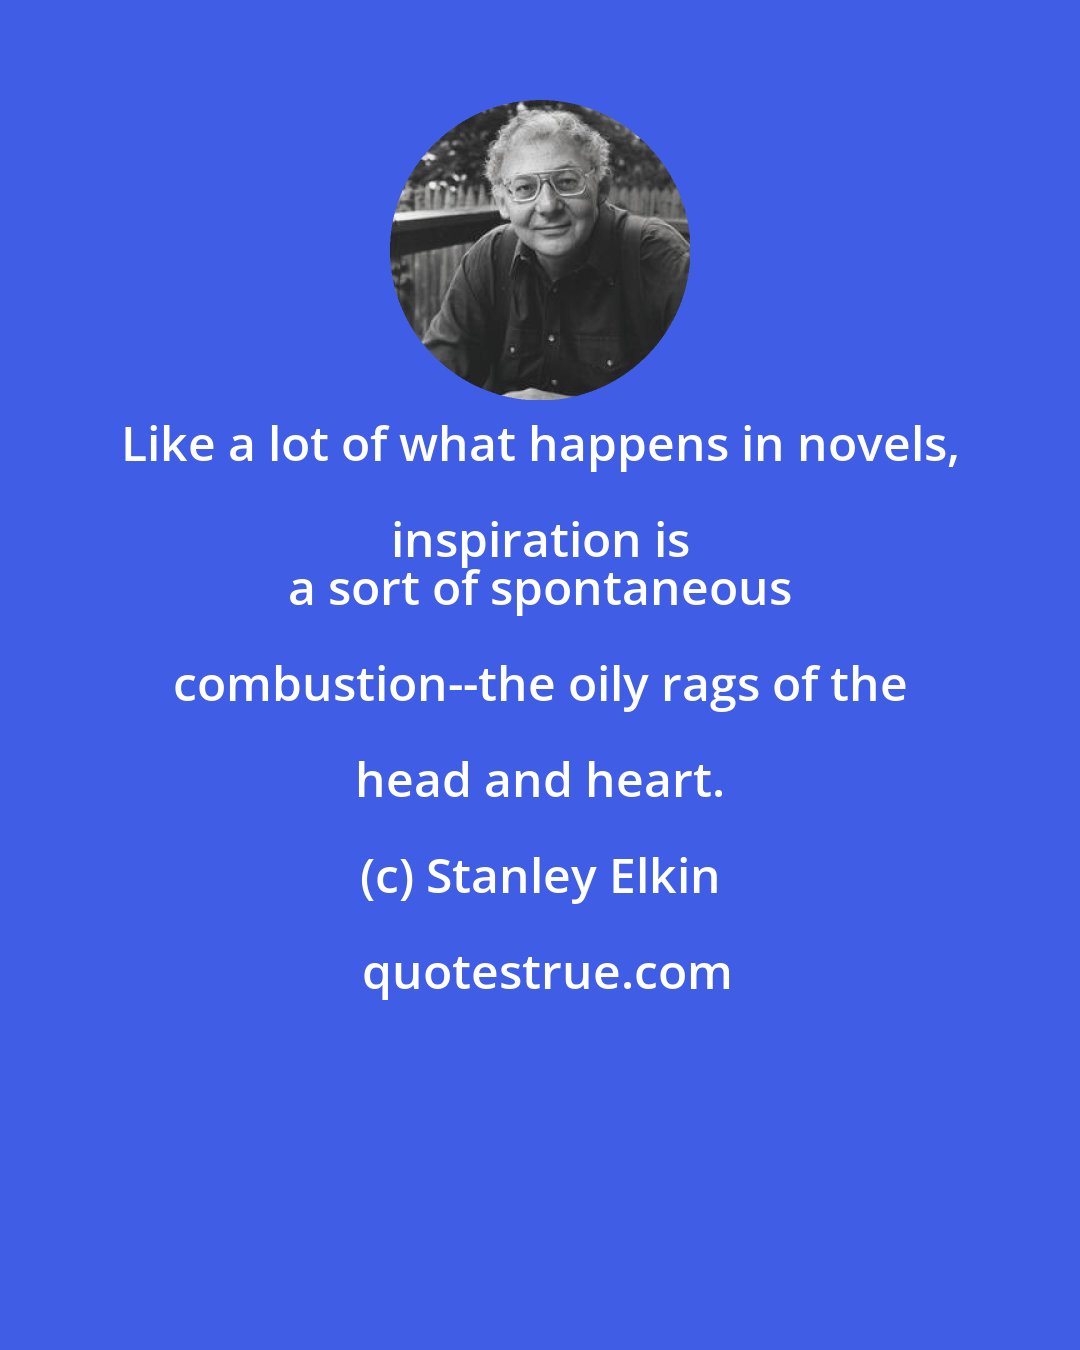 Stanley Elkin: Like a lot of what happens in novels, inspiration is 
 a sort of spontaneous combustion--the oily rags of the head and heart.